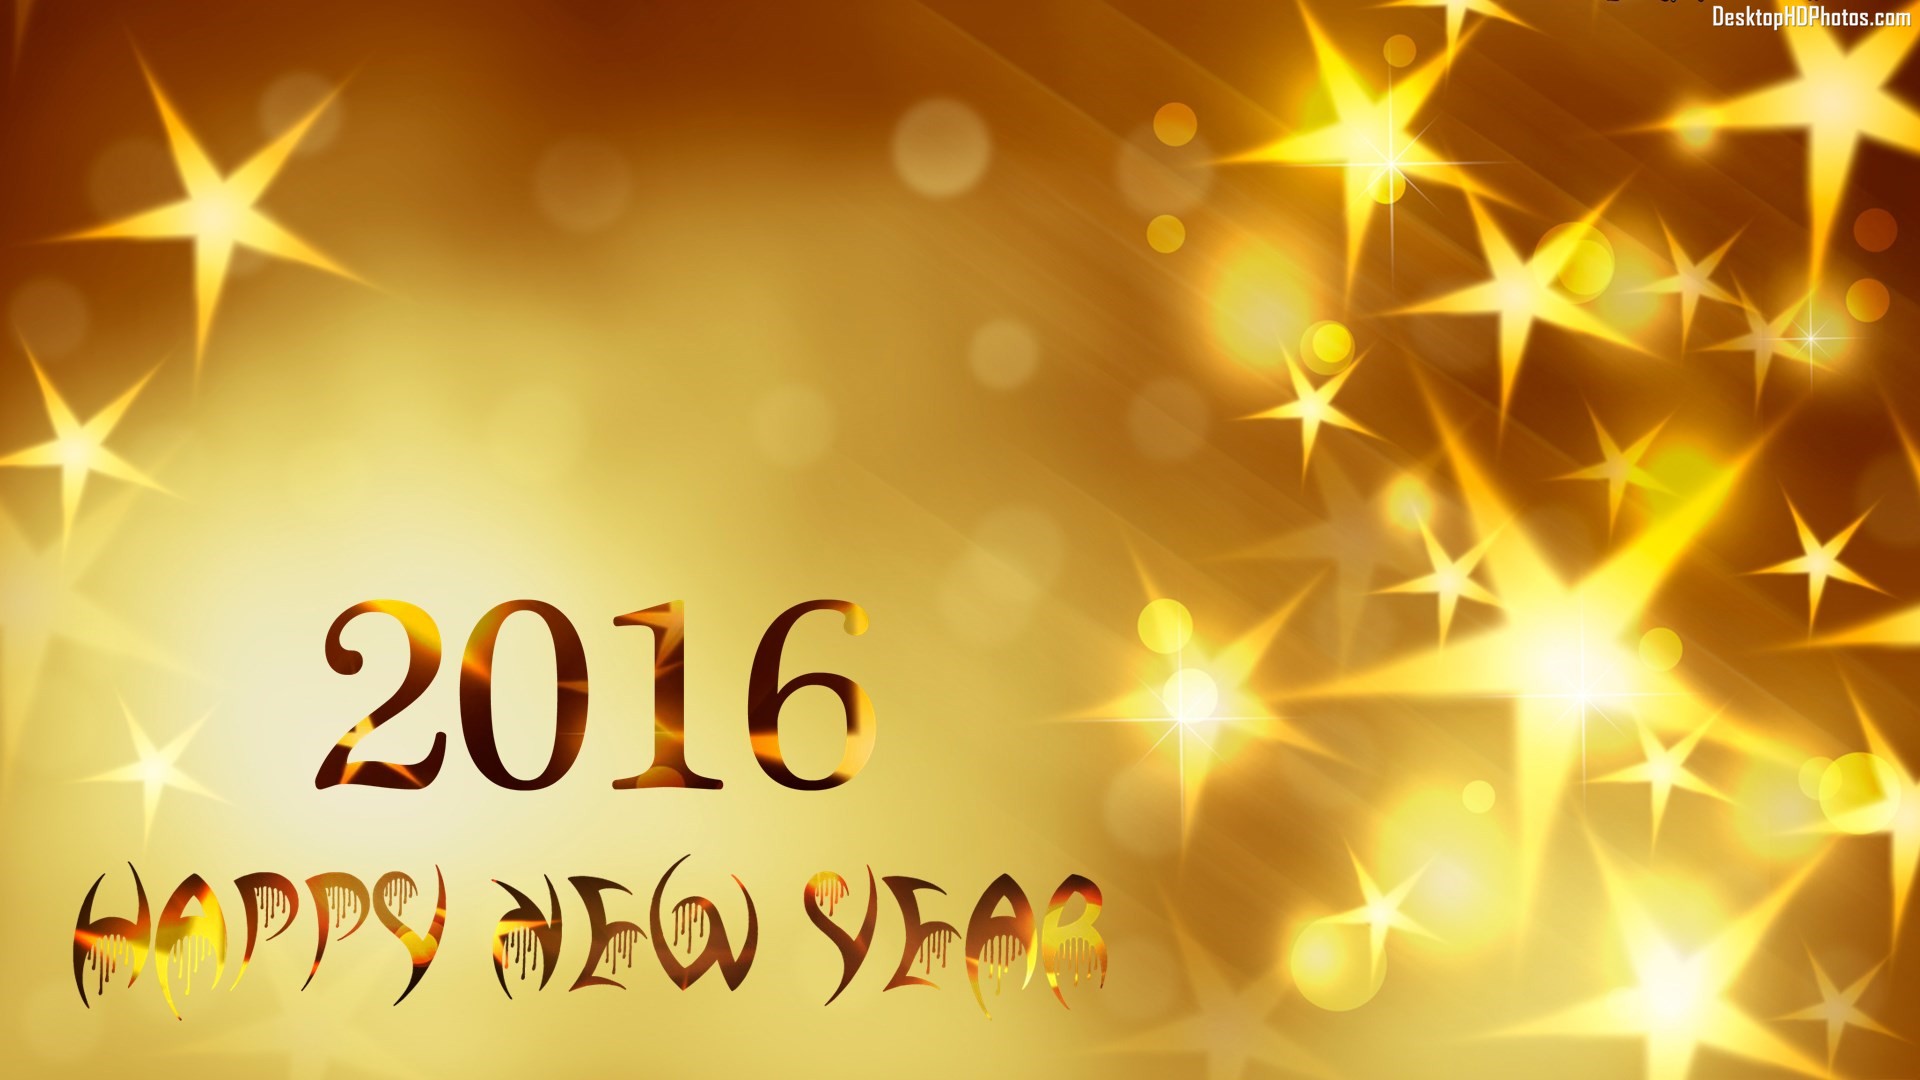 2016 Happy New Years Wallpaper - Happy New Year Background Banner -  1600x922 Wallpaper 